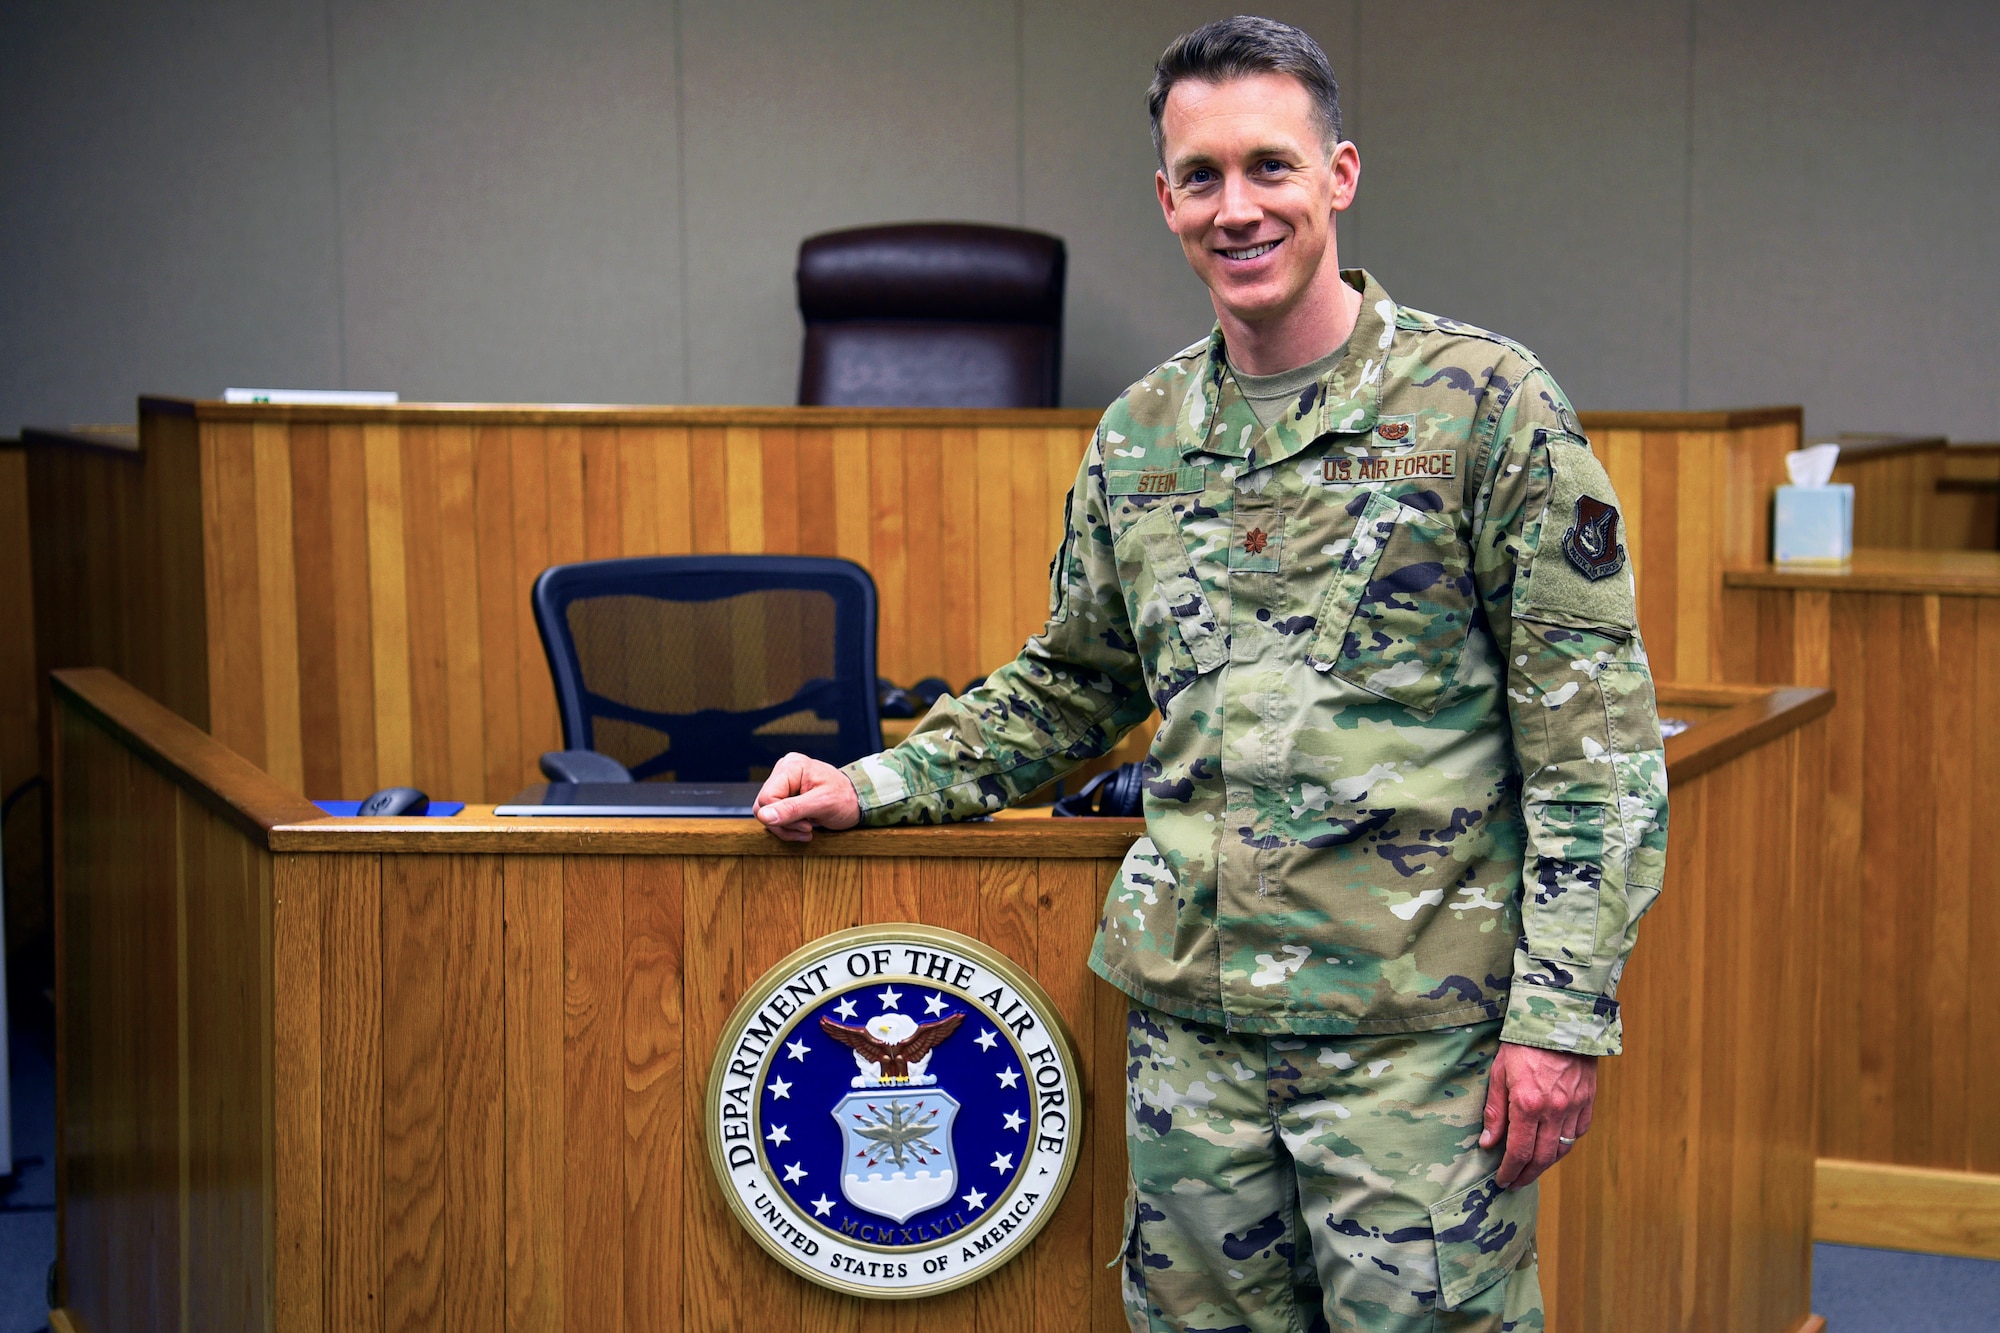 U.S. Air Force Maj. Christopher Stein, 8th Fighter Wing staff judge advocate, poses for a photo at Kunsan Air Base, Republic of Korea, May 22, 2019. Stein was awarded the Outstanding Young Military Lawyer Award for his exceptional leadership, service to the community, and development of subordinates. (U.S. Air Force photo by Tech. Sgt. Joshua P. Arends)